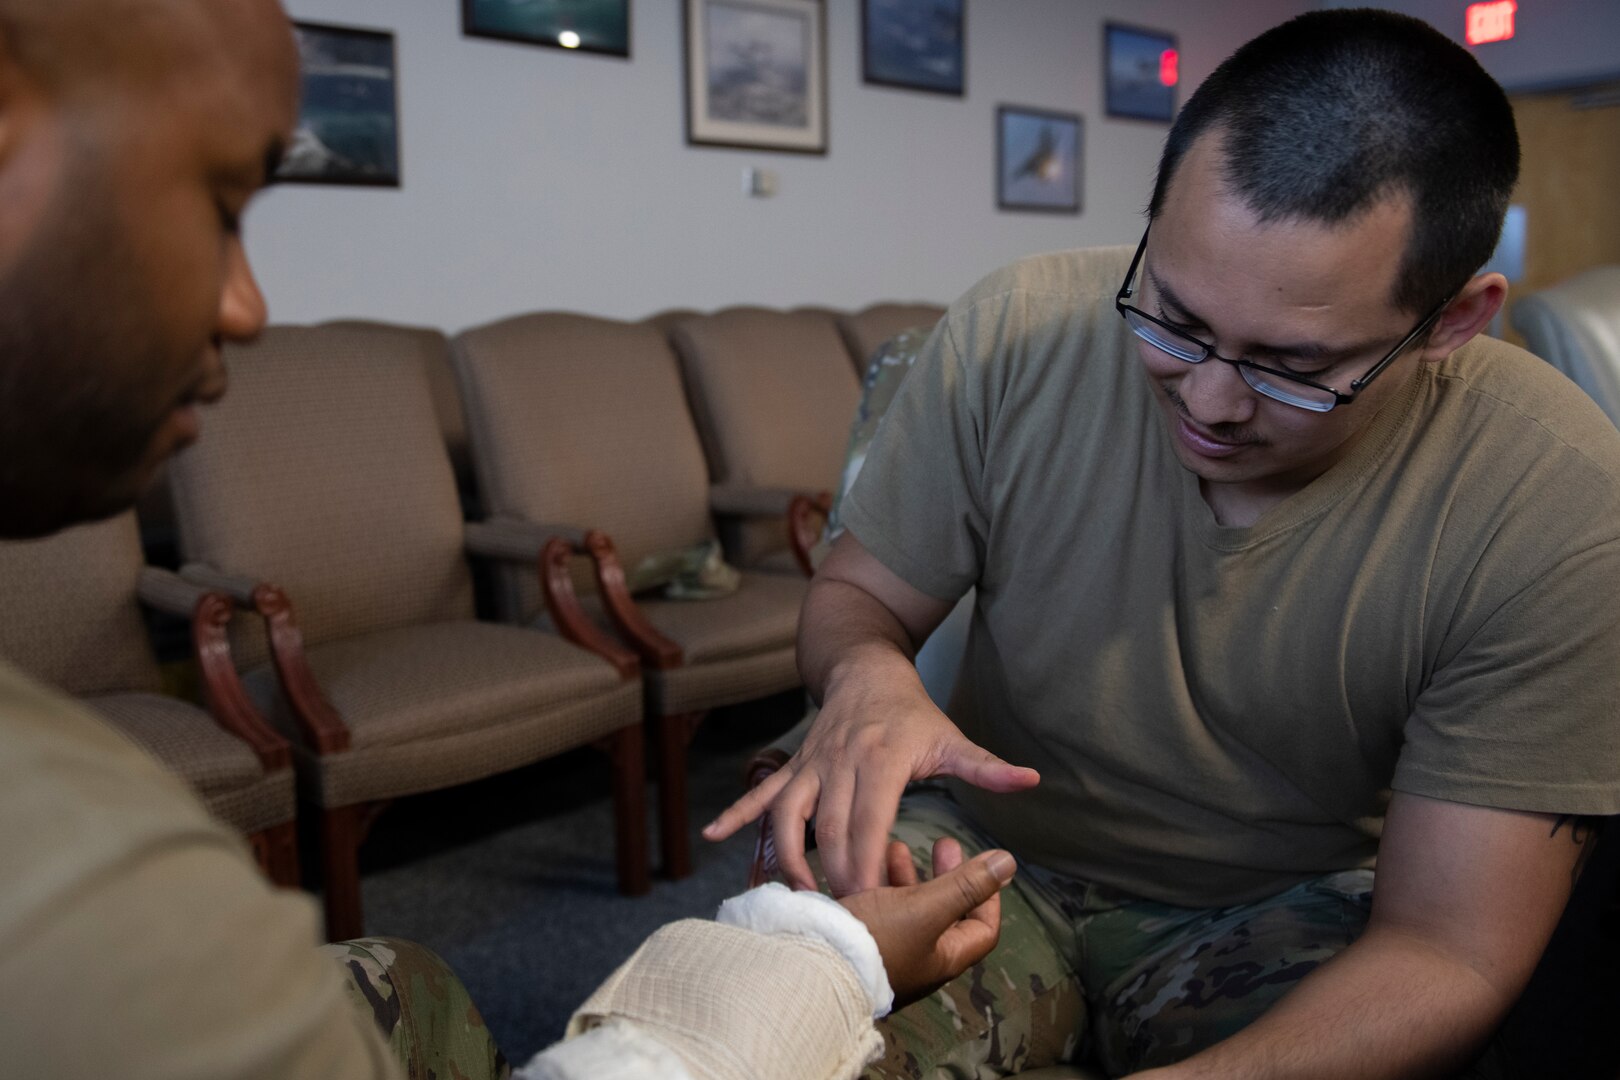 One service member examines the hand of another service member.